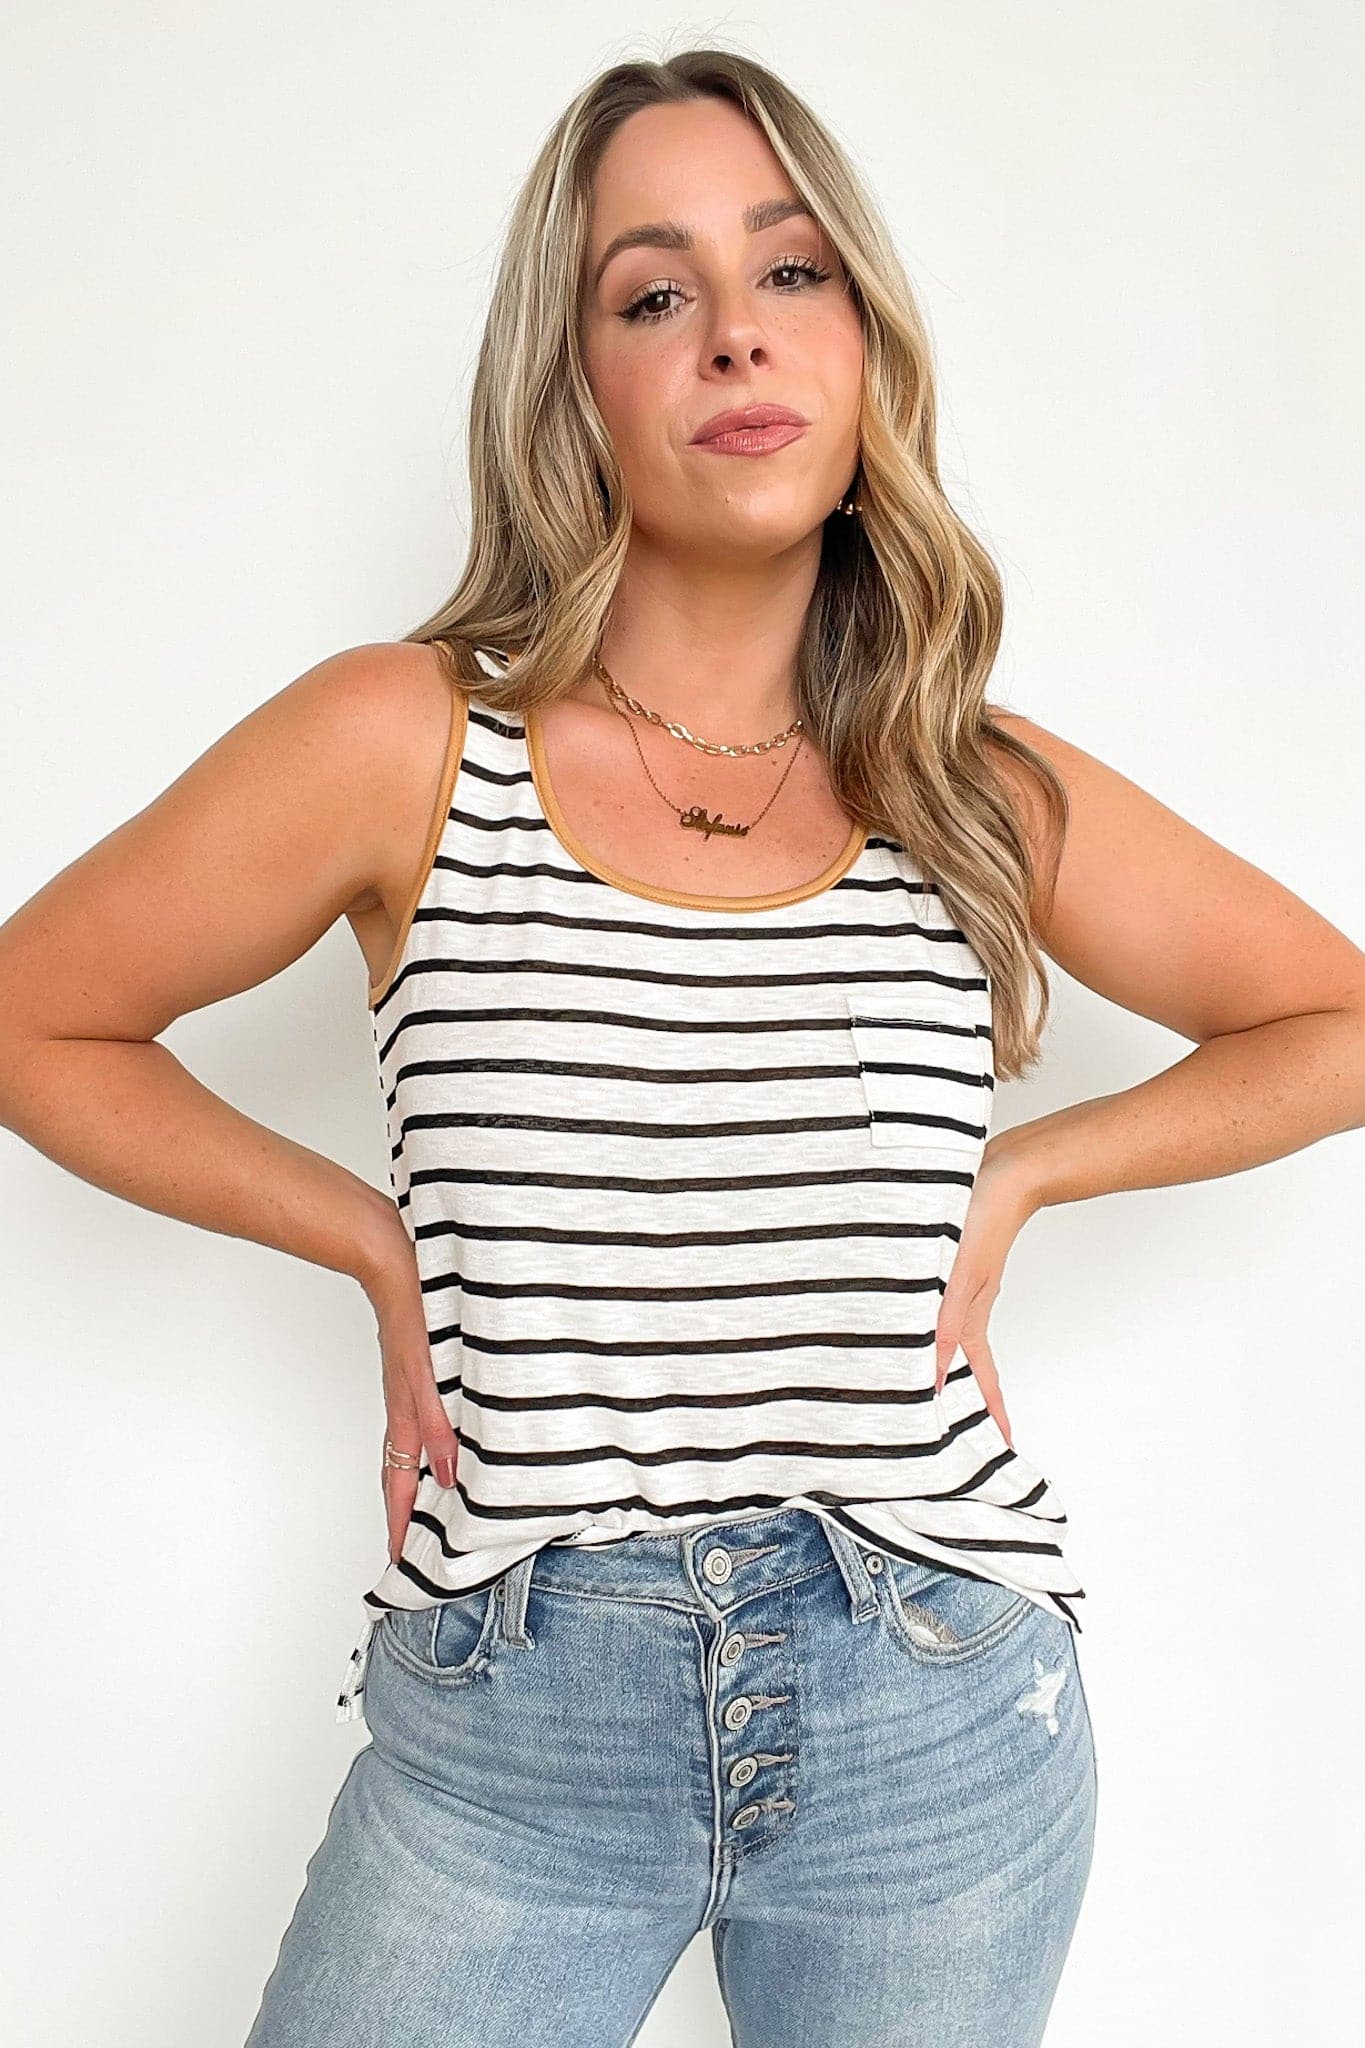  Frisco Striped Contrast Tank Top - FINAL SALE - Madison and Mallory